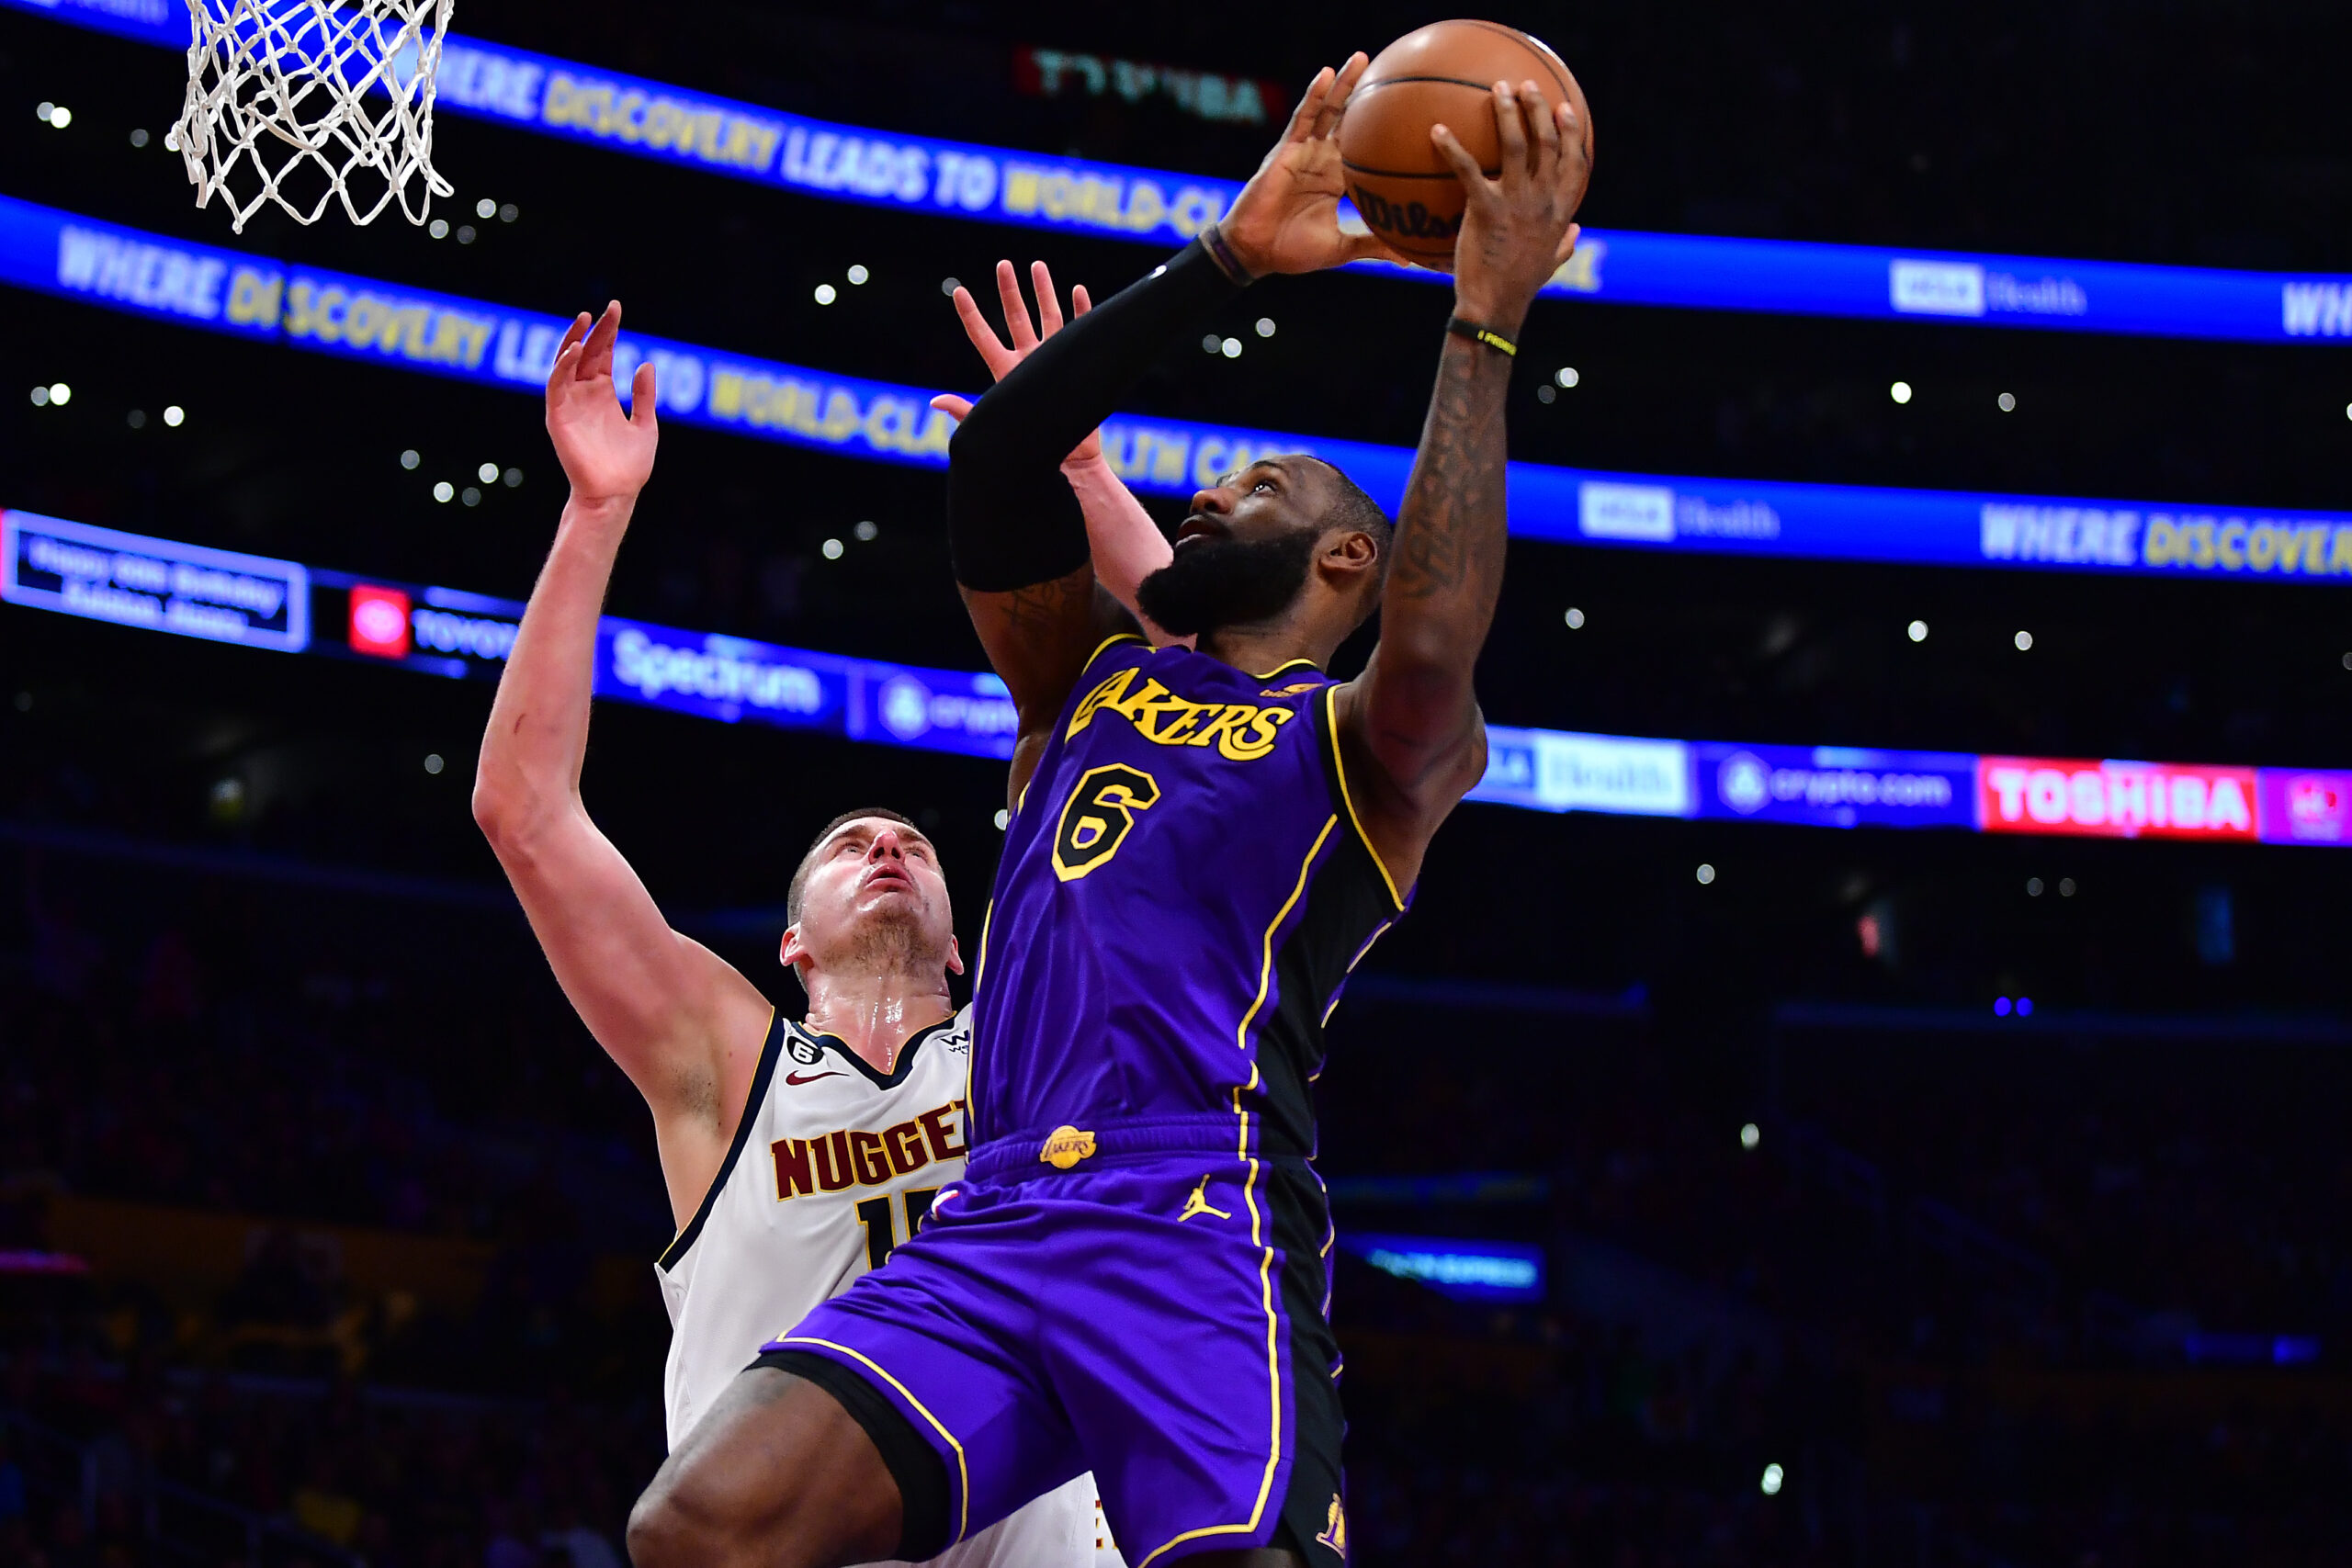 Lakers beat Nuggets 126-108